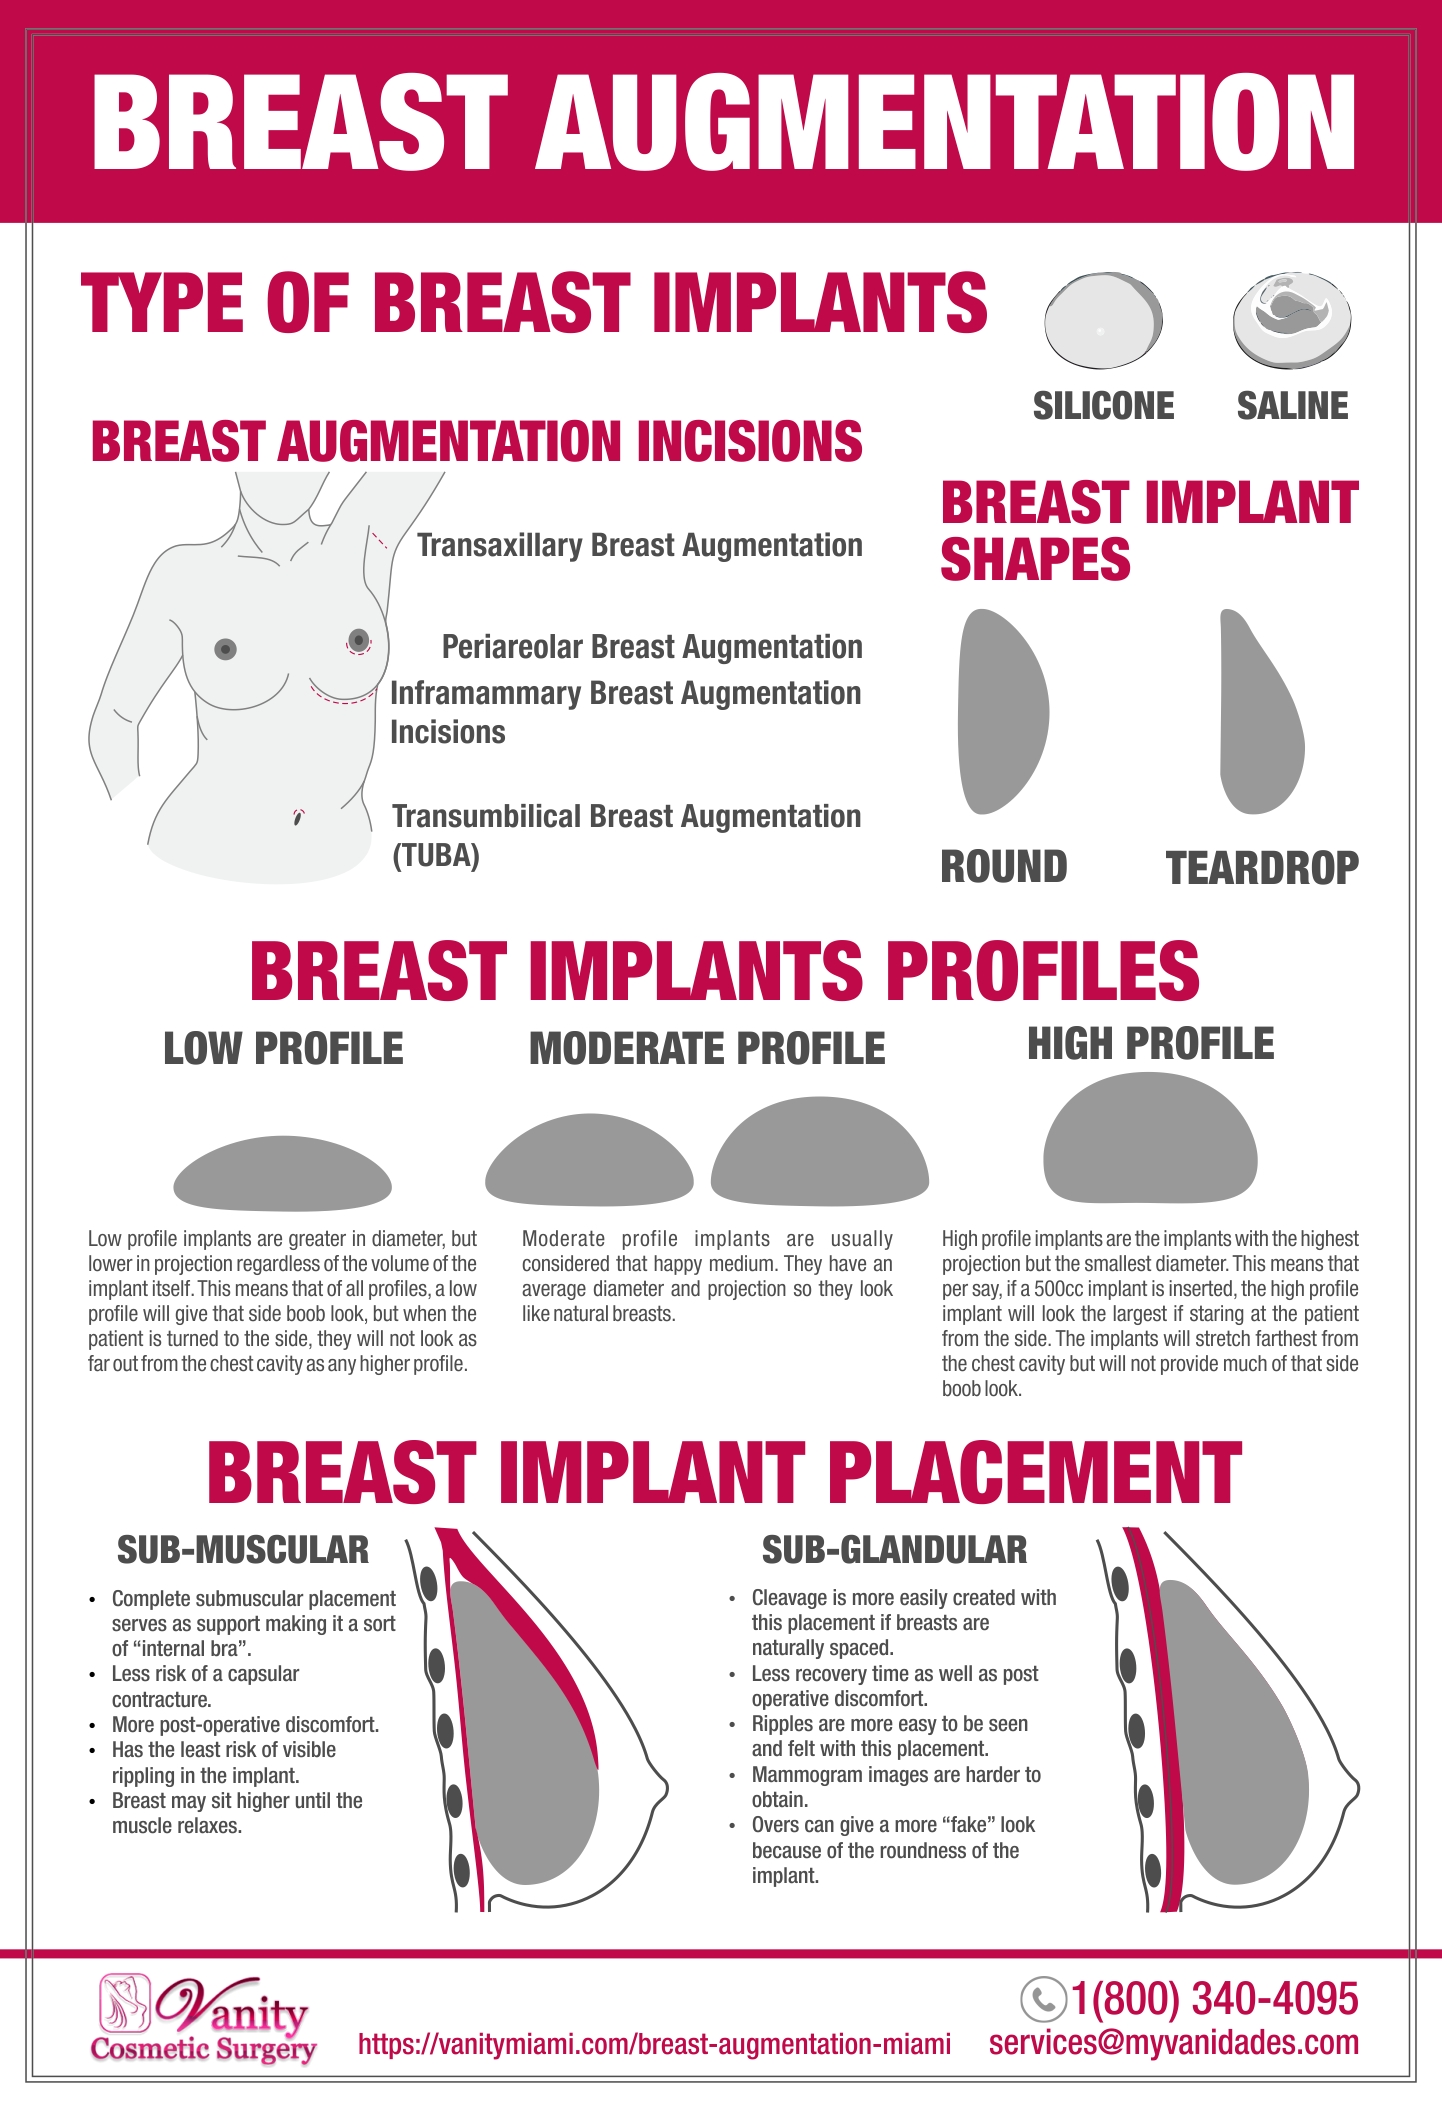 Breast Augmentation: All you need to know.